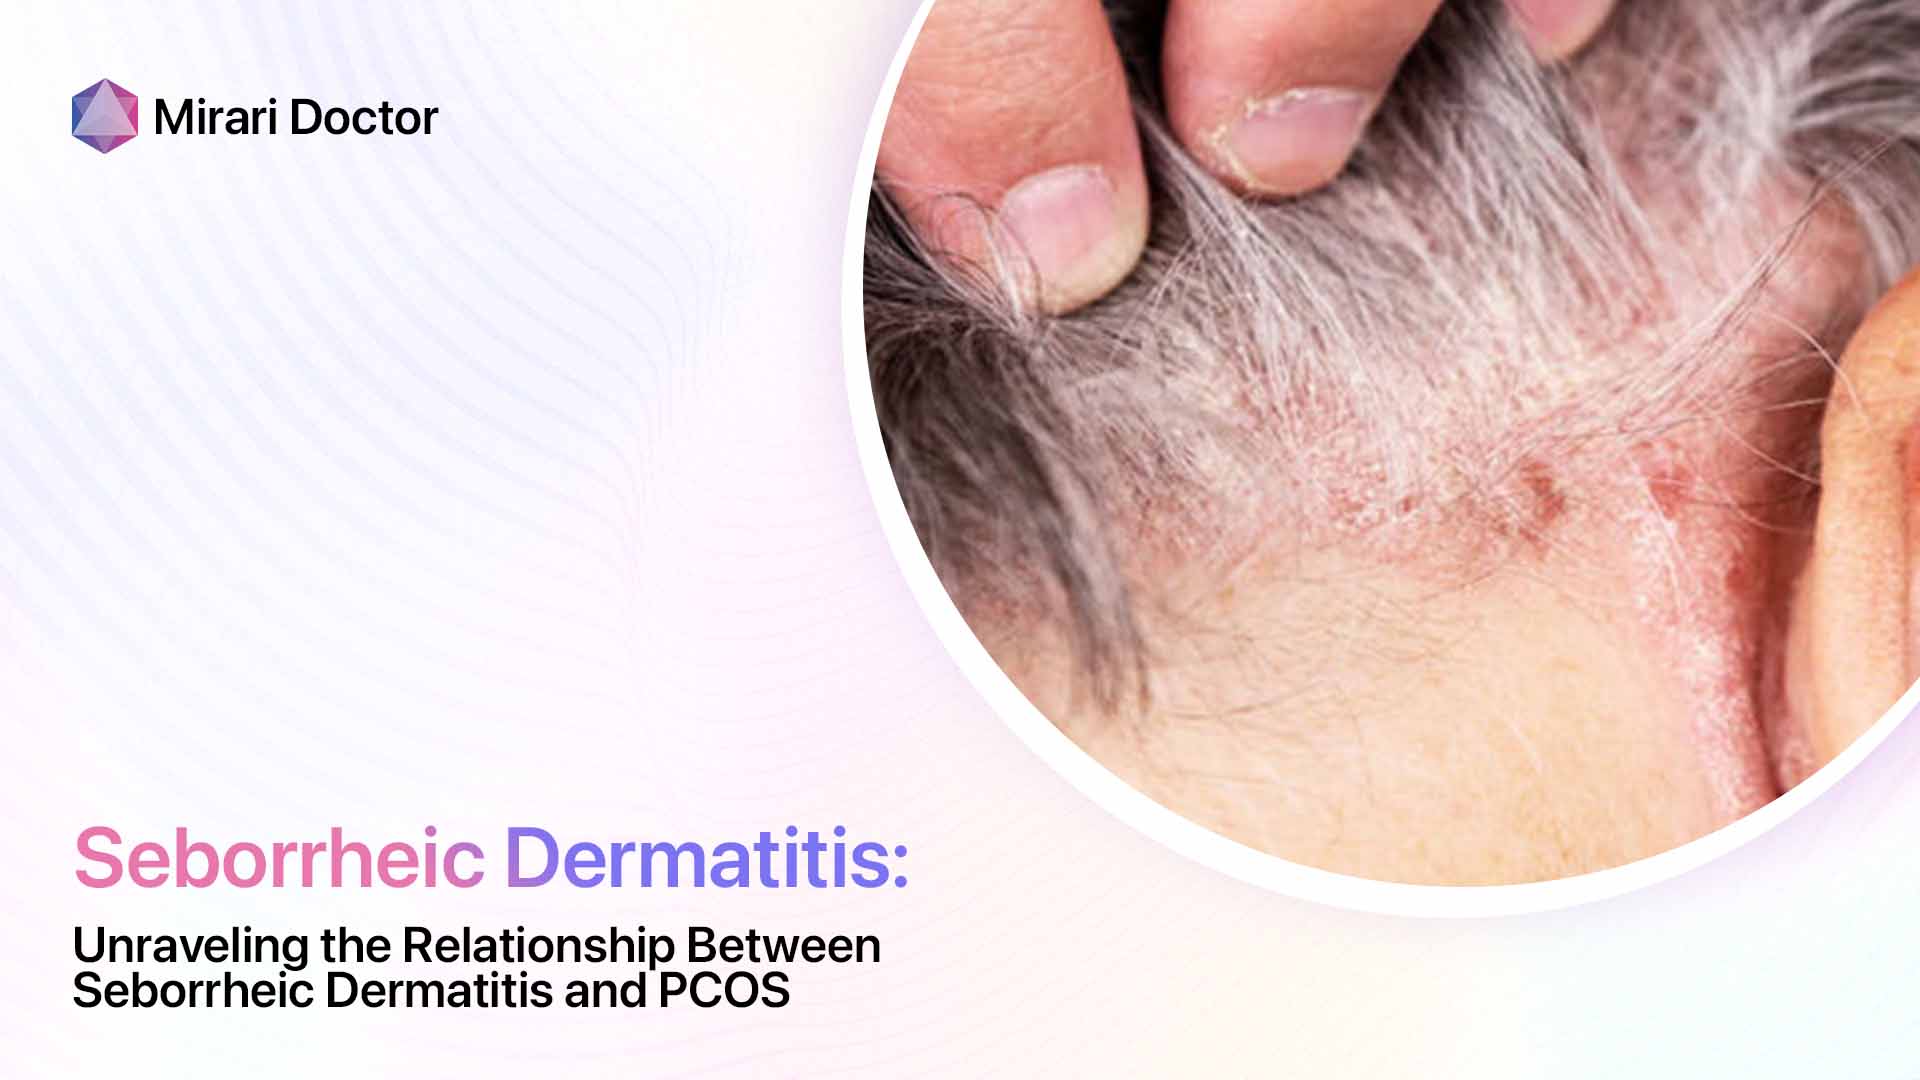 Featured image for “Unraveling the Relationship Between Seborrheic Dermatitis and PCOS”